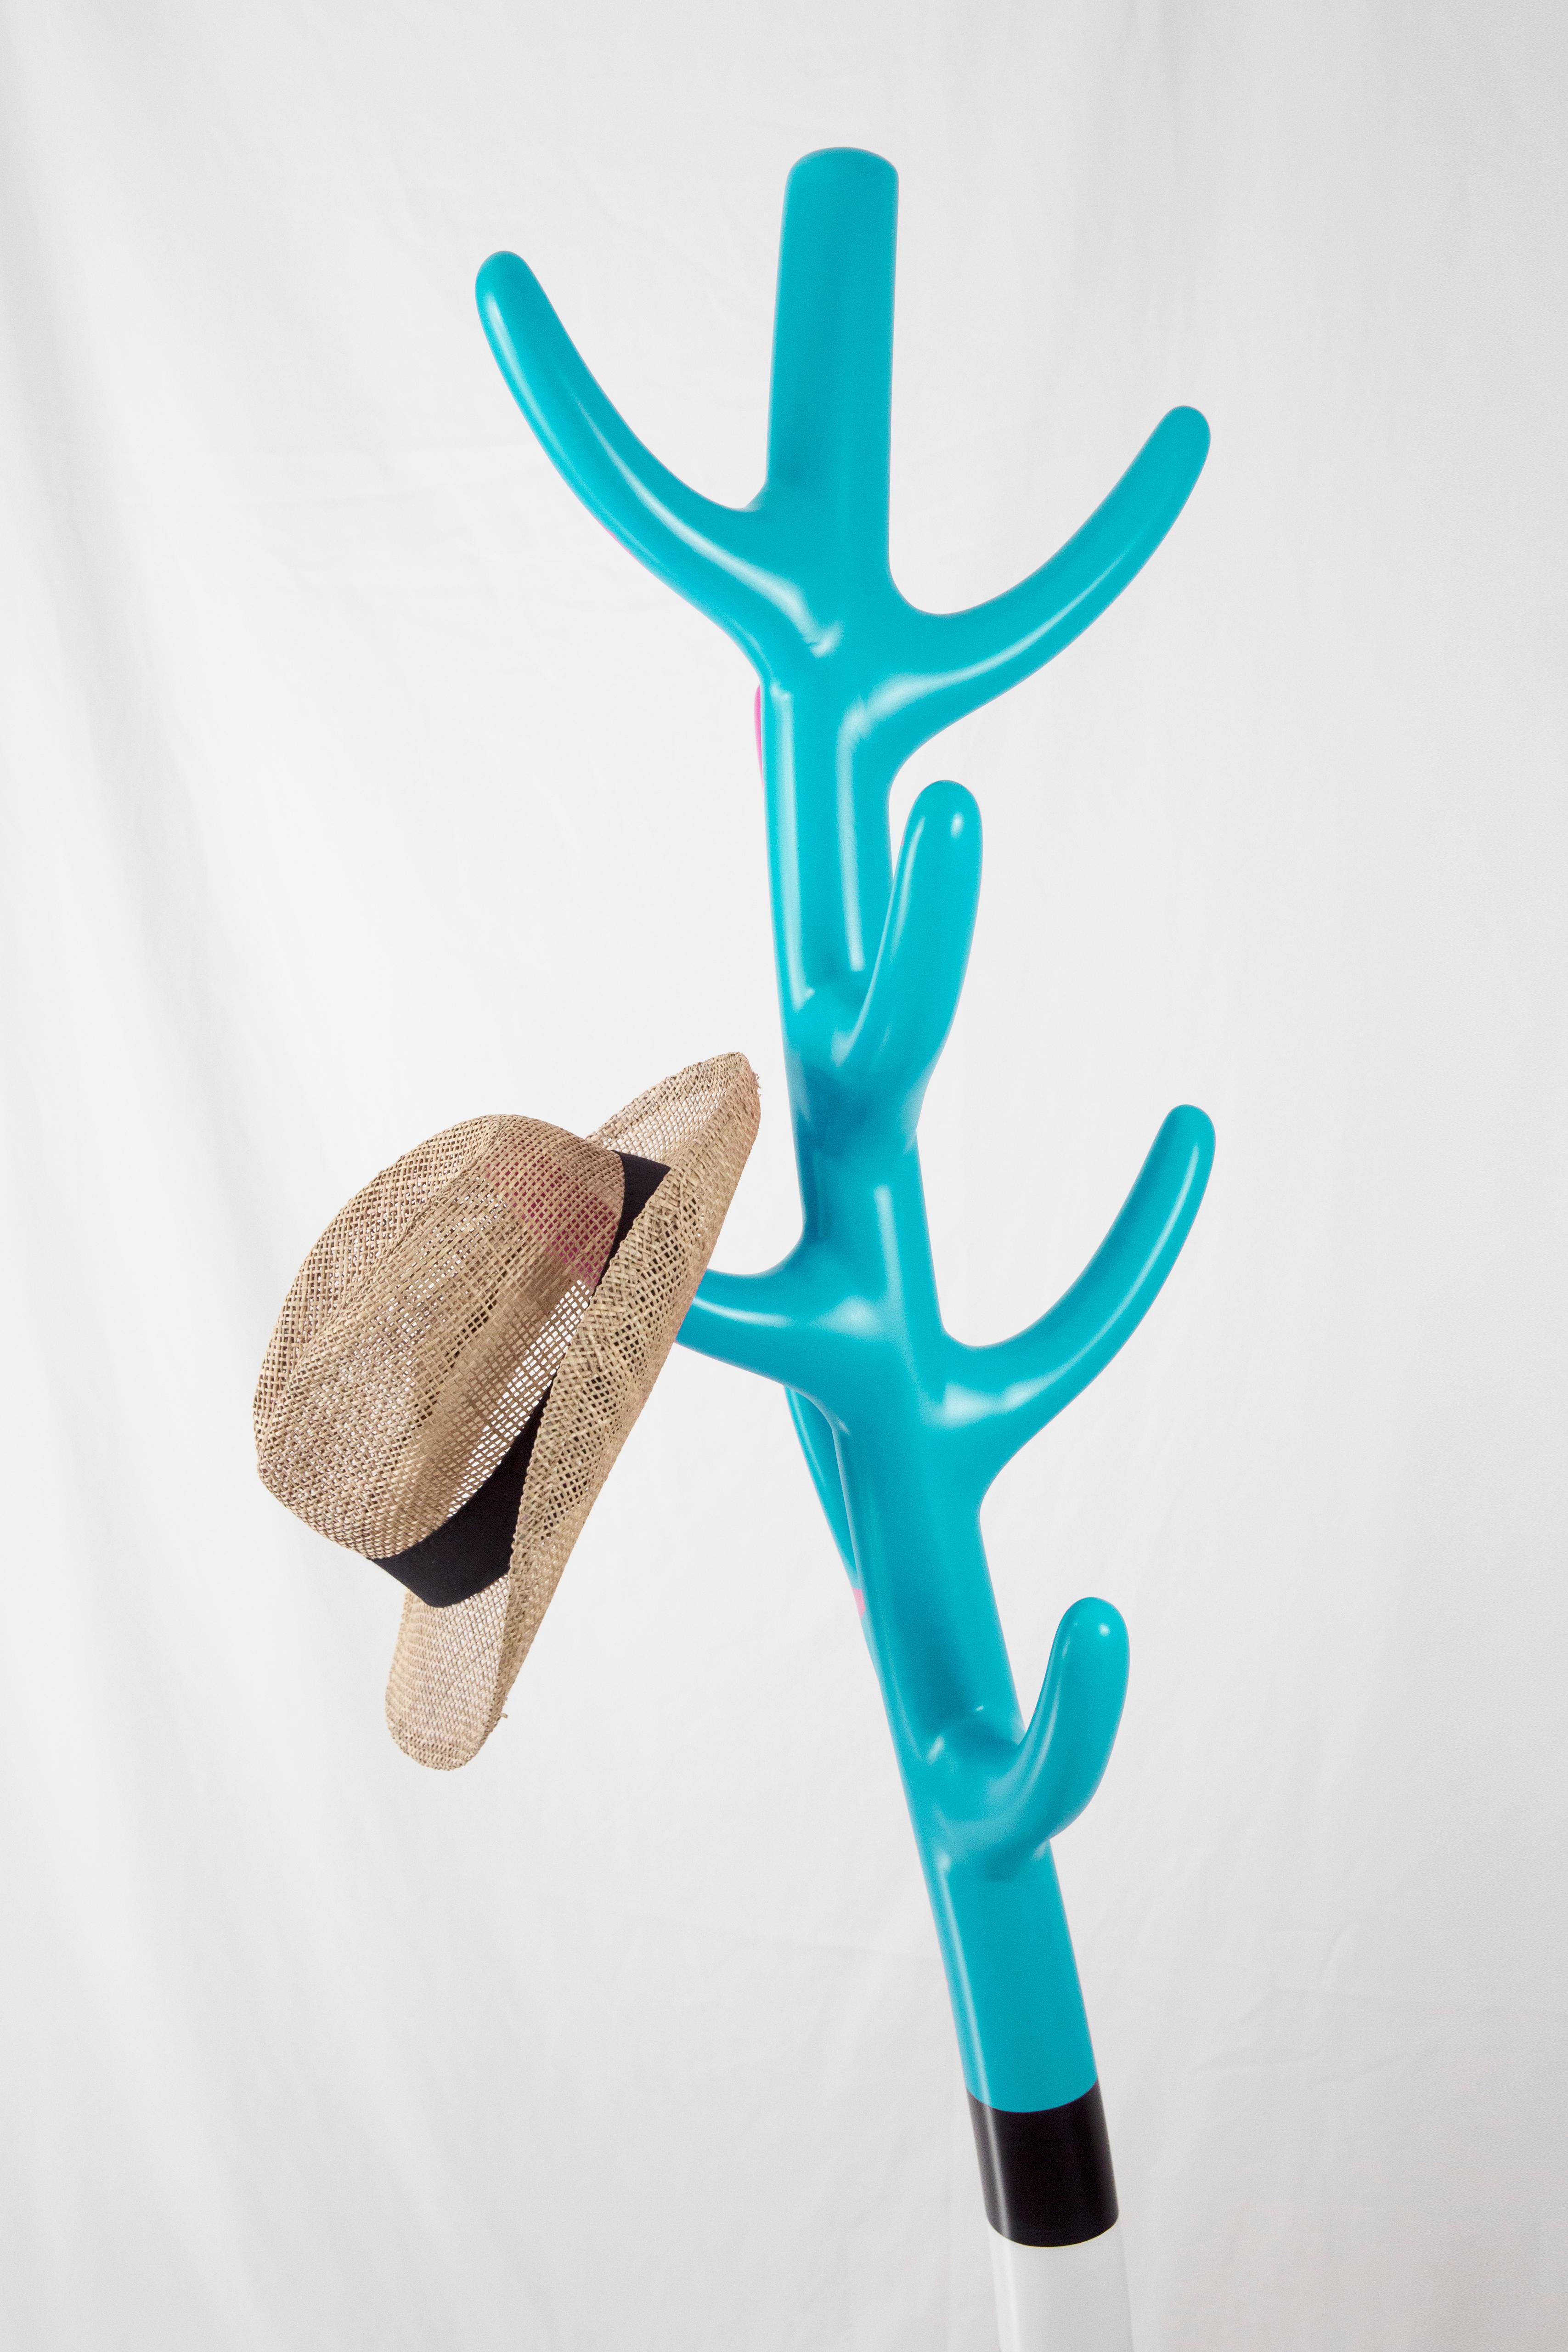 Overview:
Elevate your decor with the Crooked Coat Rack, a piece where art meets functionality. This sculptural coat rack, featuring a vibrant turquoise hue, serves not only as a practical item but also as a captivating art object that will draw the